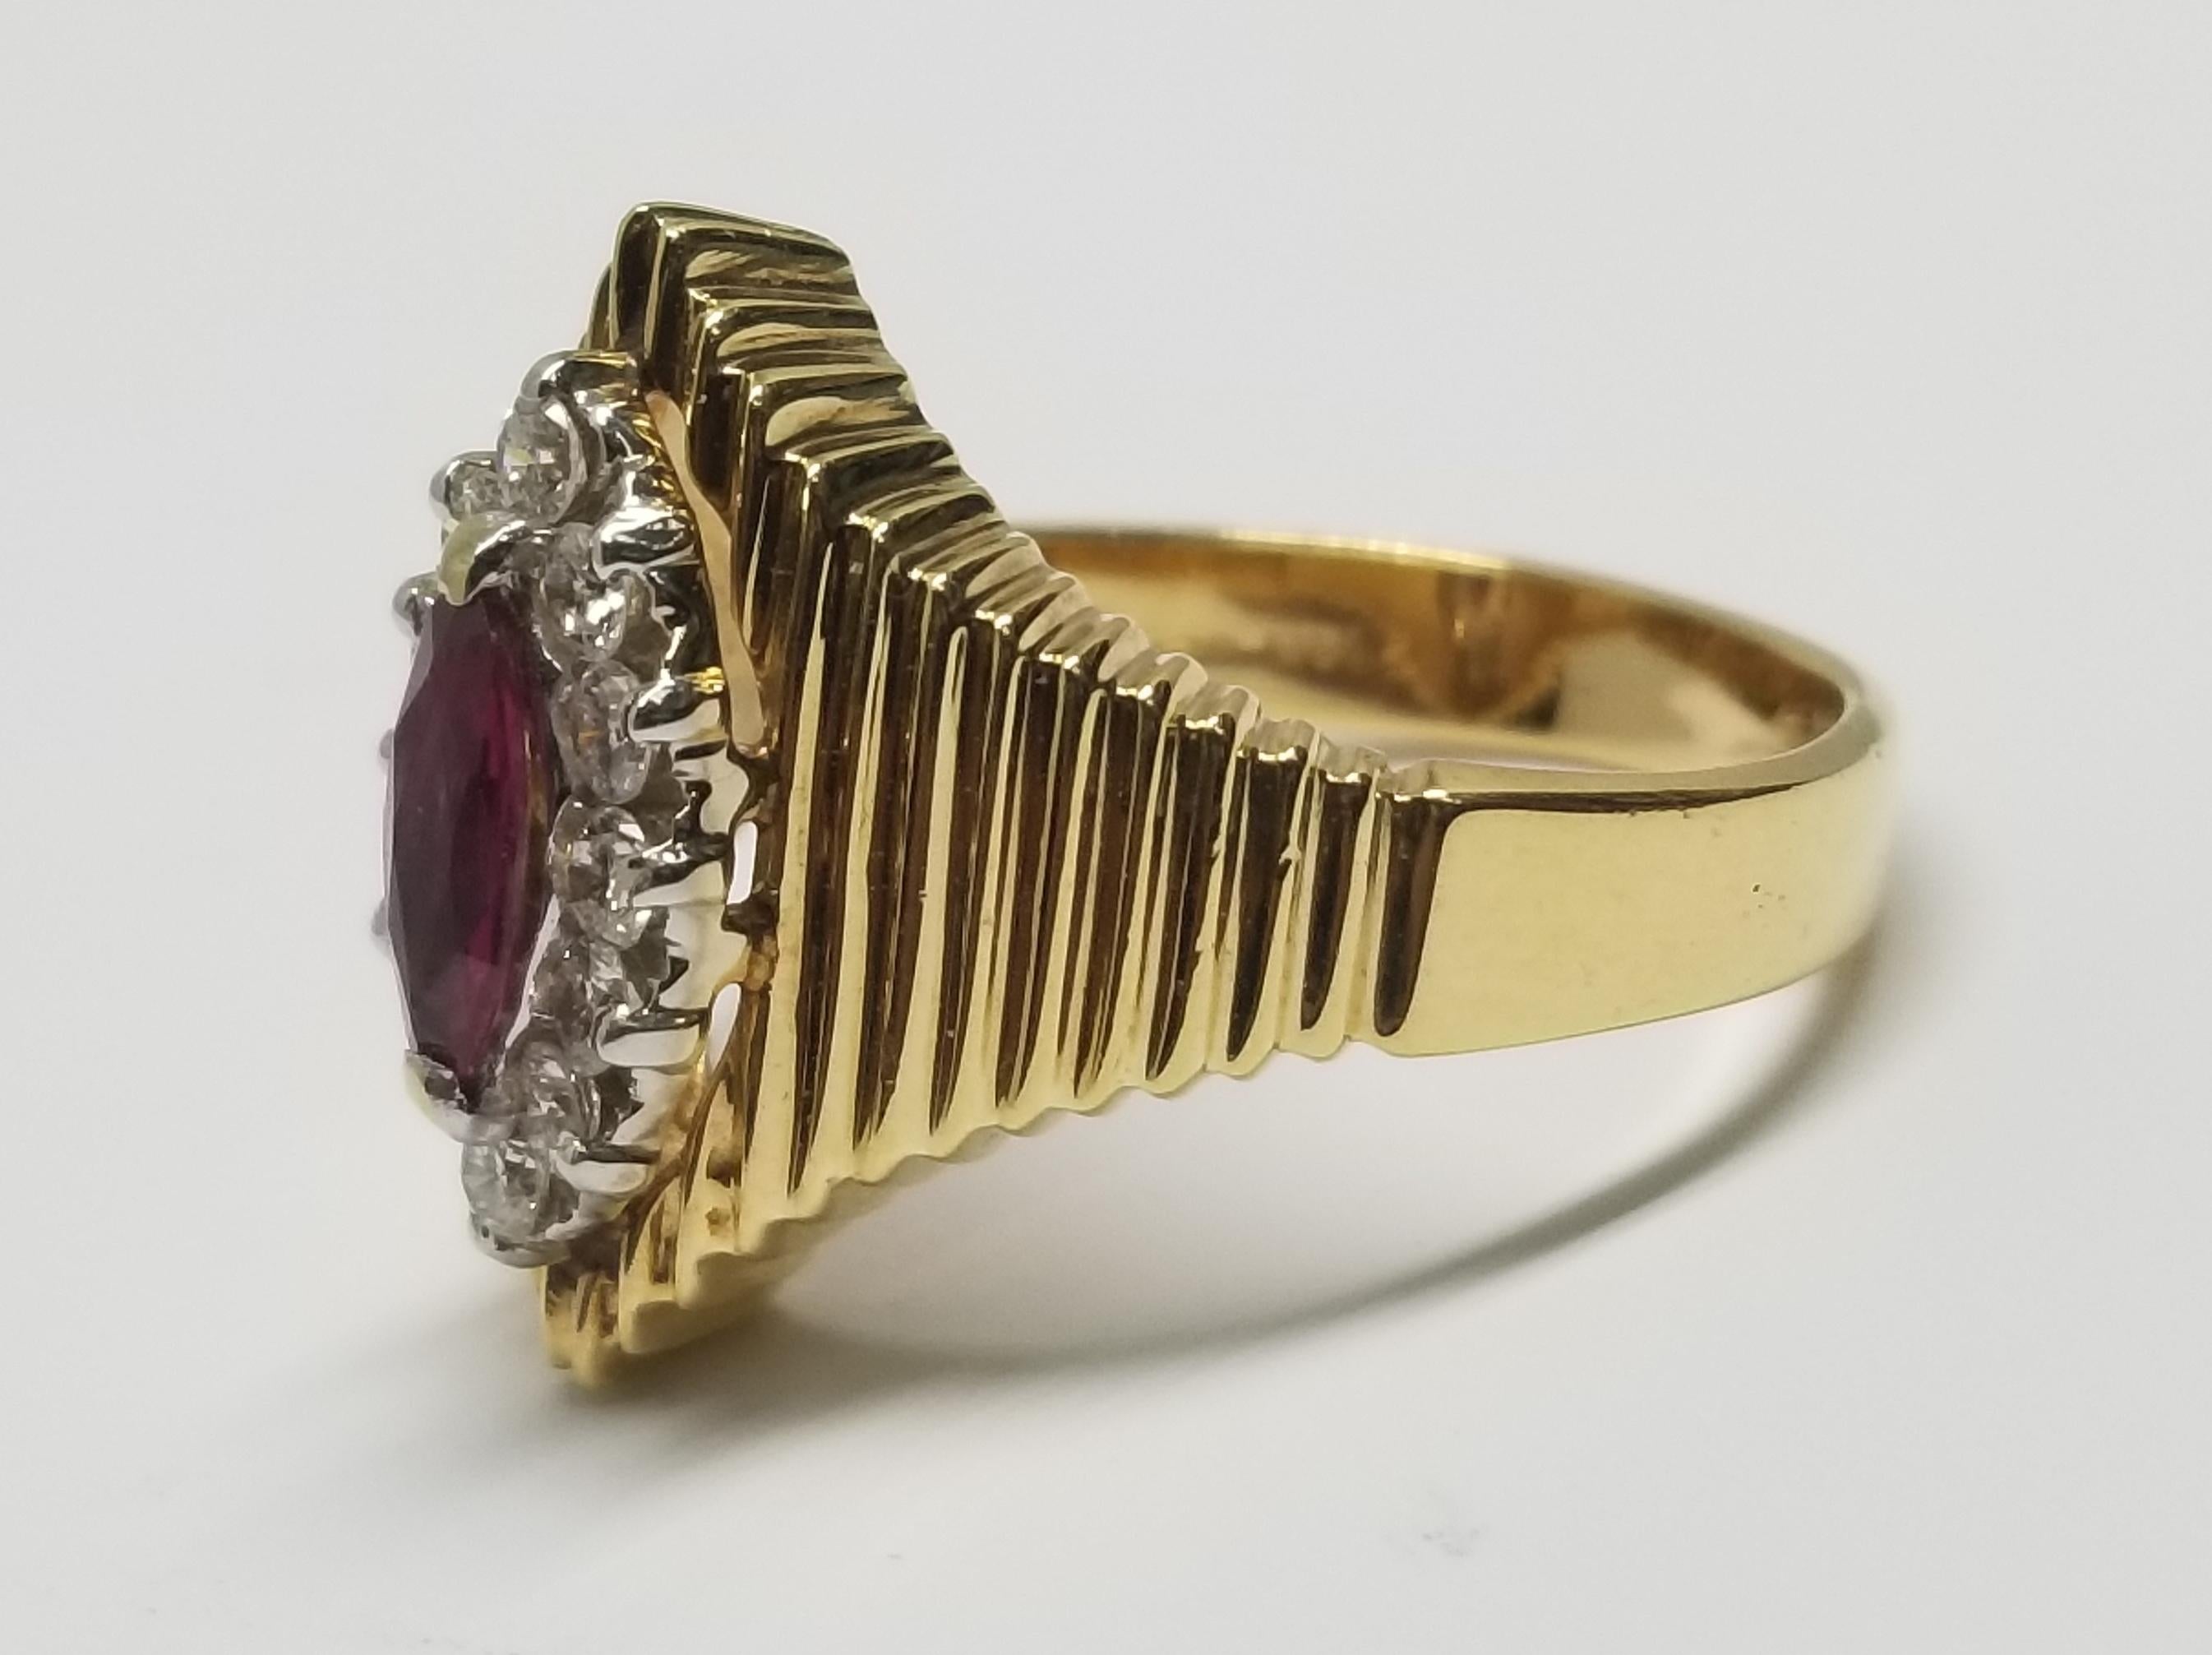 14k yellow gold ruby and diamond ring, containing 1 marquise cut ruby weighing .40pts. and 12 round full cut diamonds of very fine quality weighing .40pts. on a ribbed band.  This ring is a size 6 but we will size to fit for free.
*center stone can